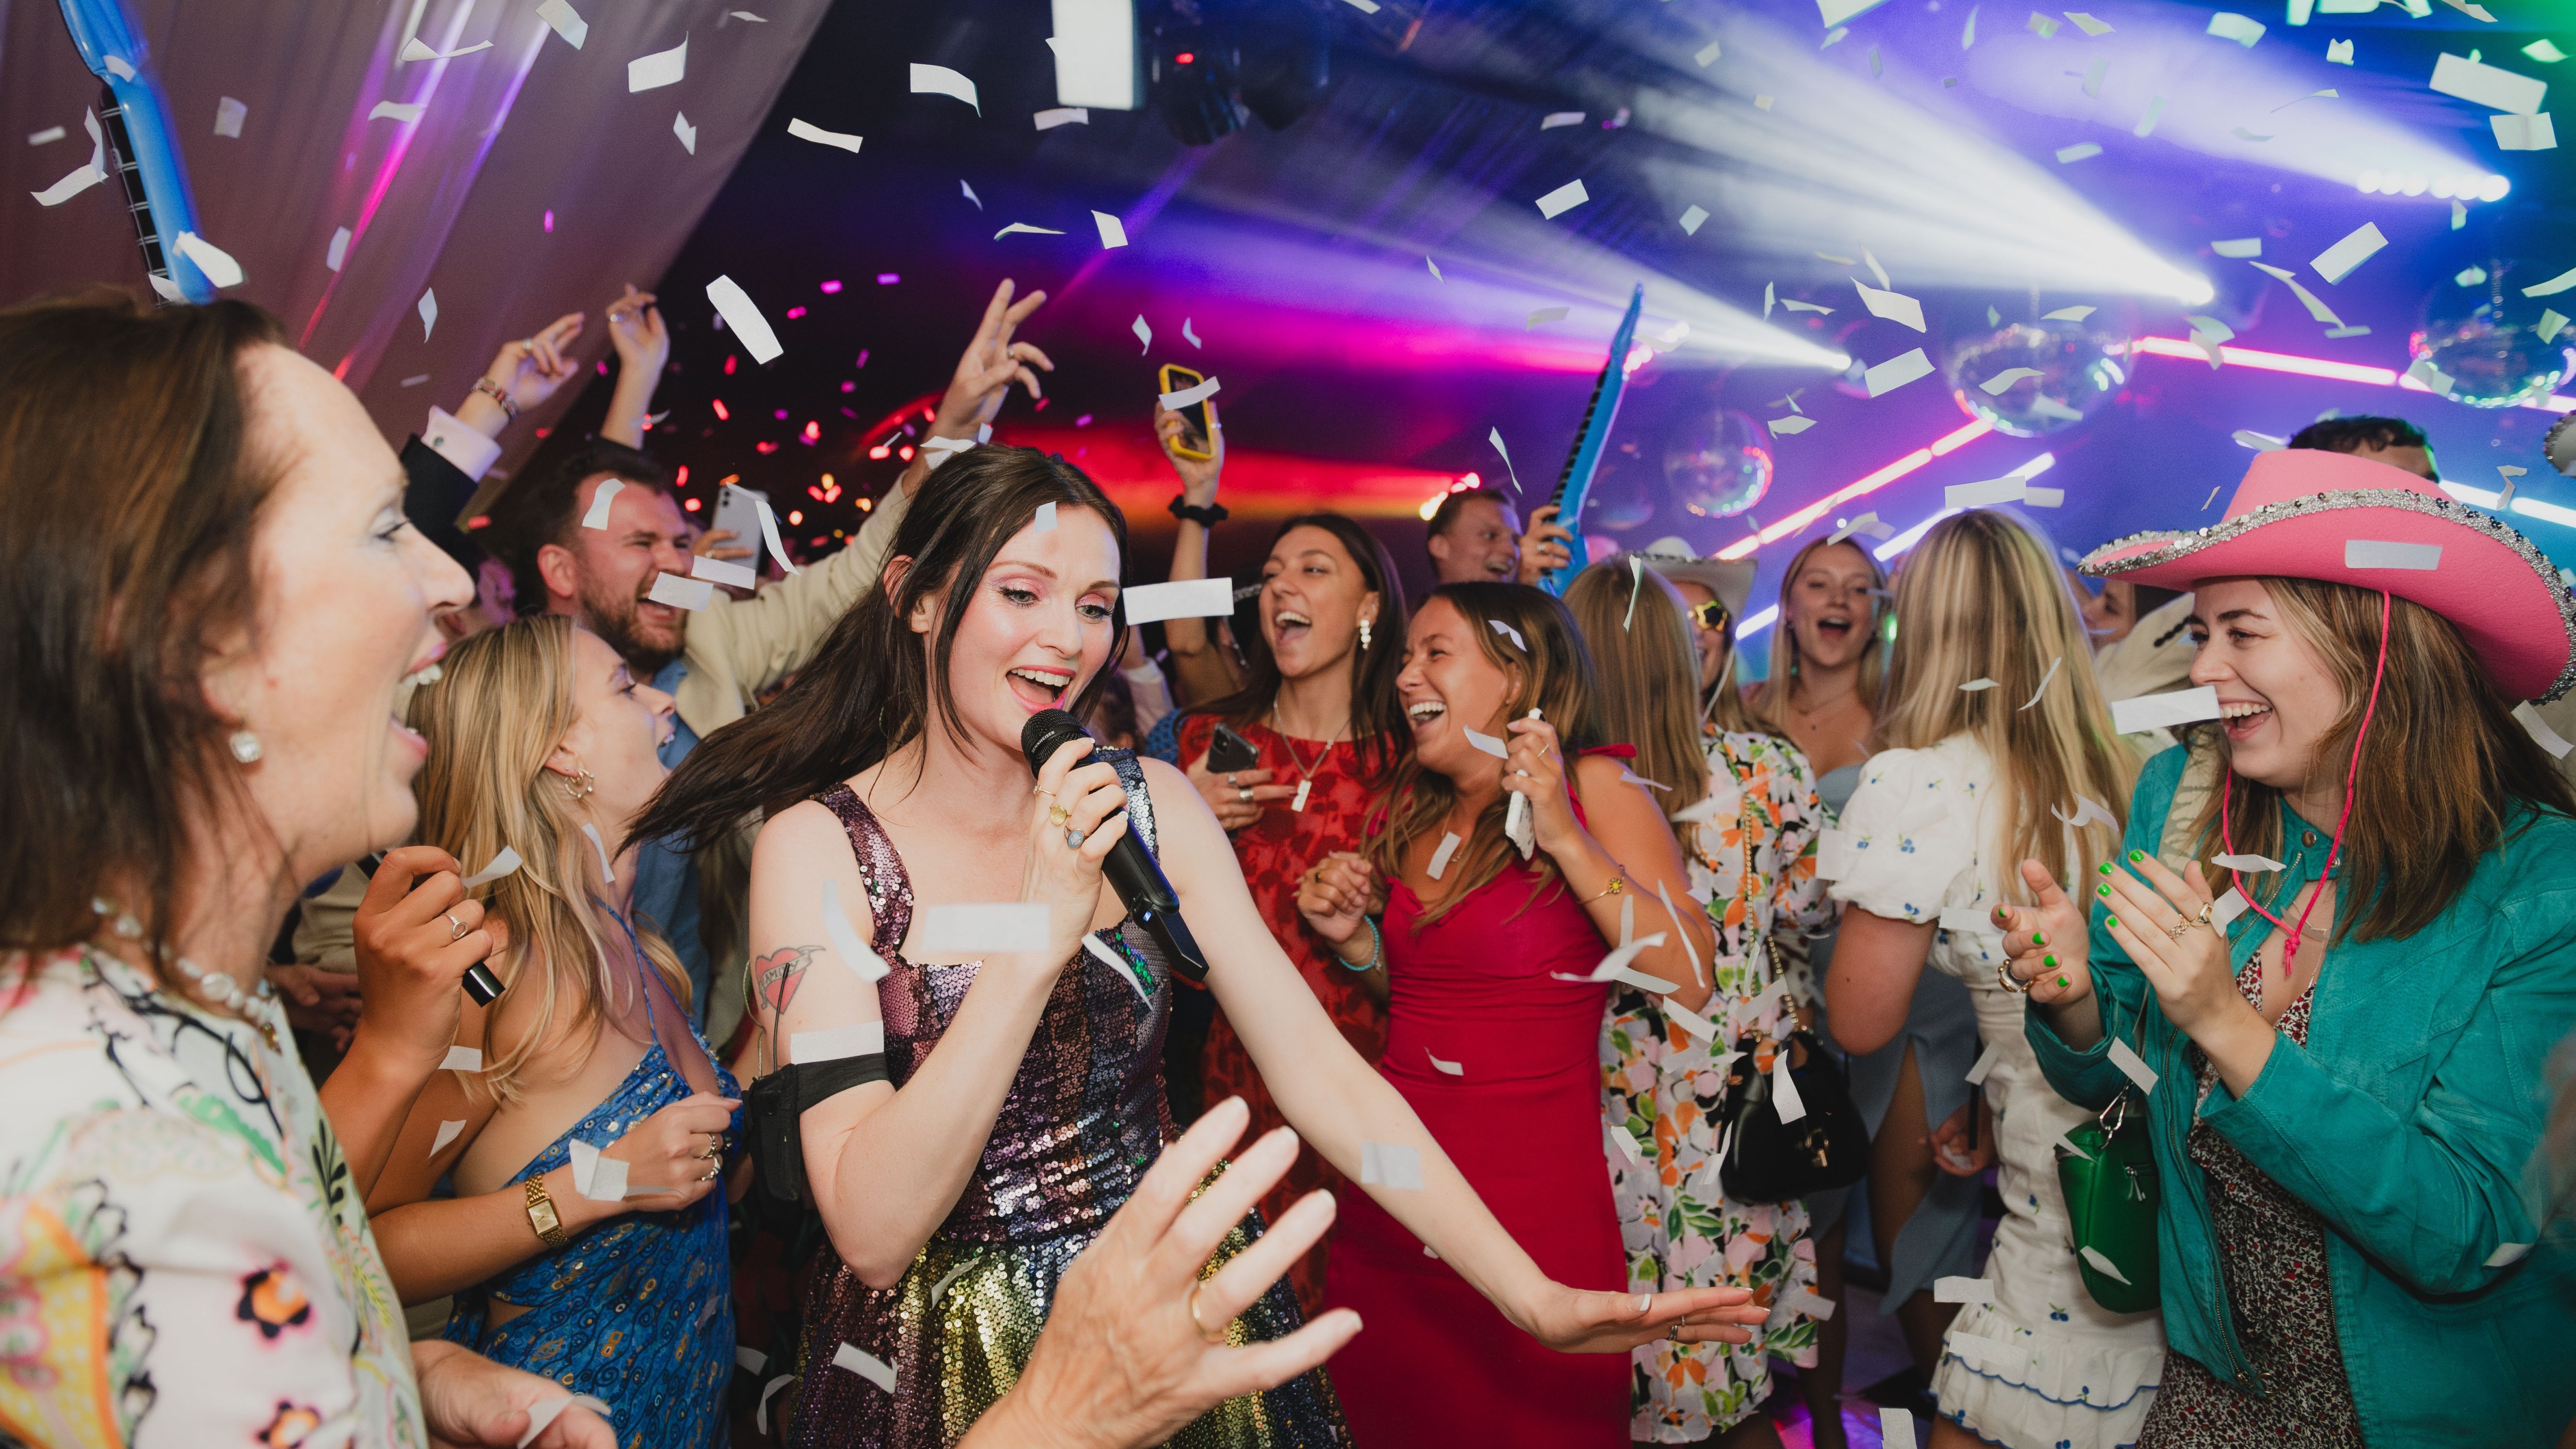 Category highly commended — A Listers: Murder on the Dancefloor. Sophie Ellis Bextor entertains guests at a private party in the Cotswolds